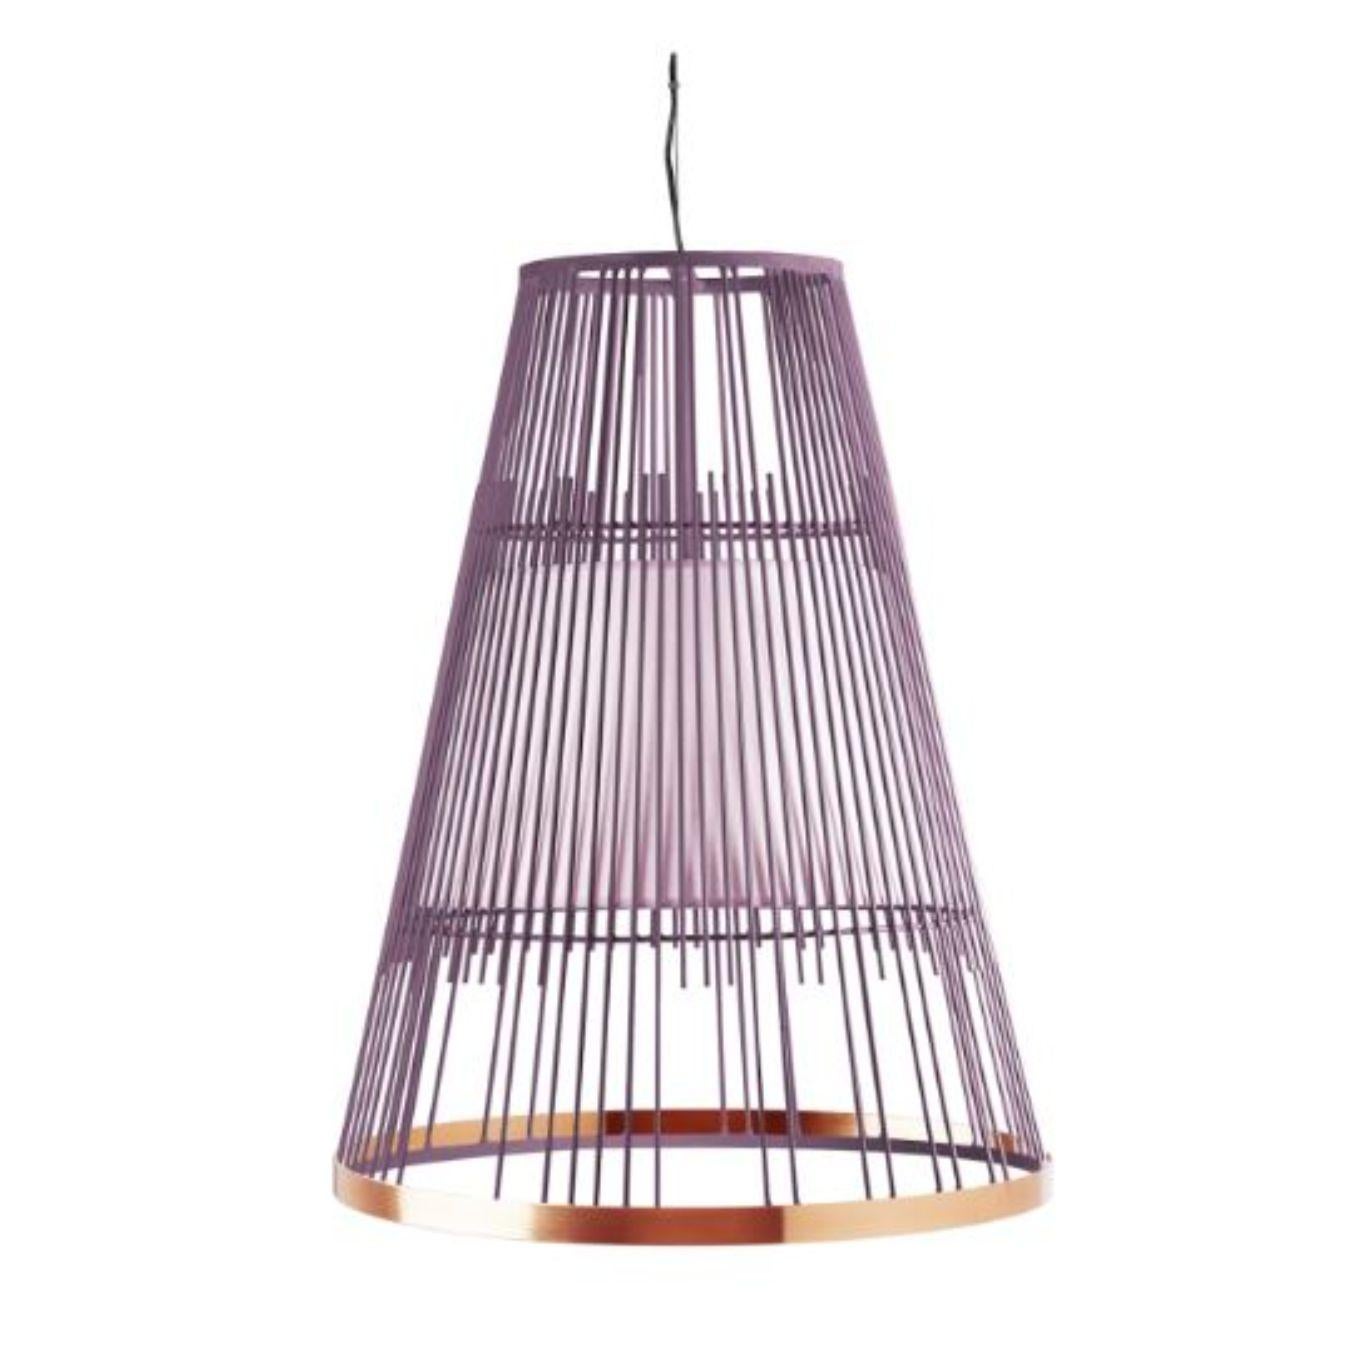 Lilac up suspension lamp with copper ring by Dooq.
Dimensions: W 55 x D 55 x H 72 cm
Materials: lacquered metal, polished or brushed metal, copper.
abat-jour: cotton
Also available in different colors and materials.

Information:
230V/50Hz
E27/1x20W